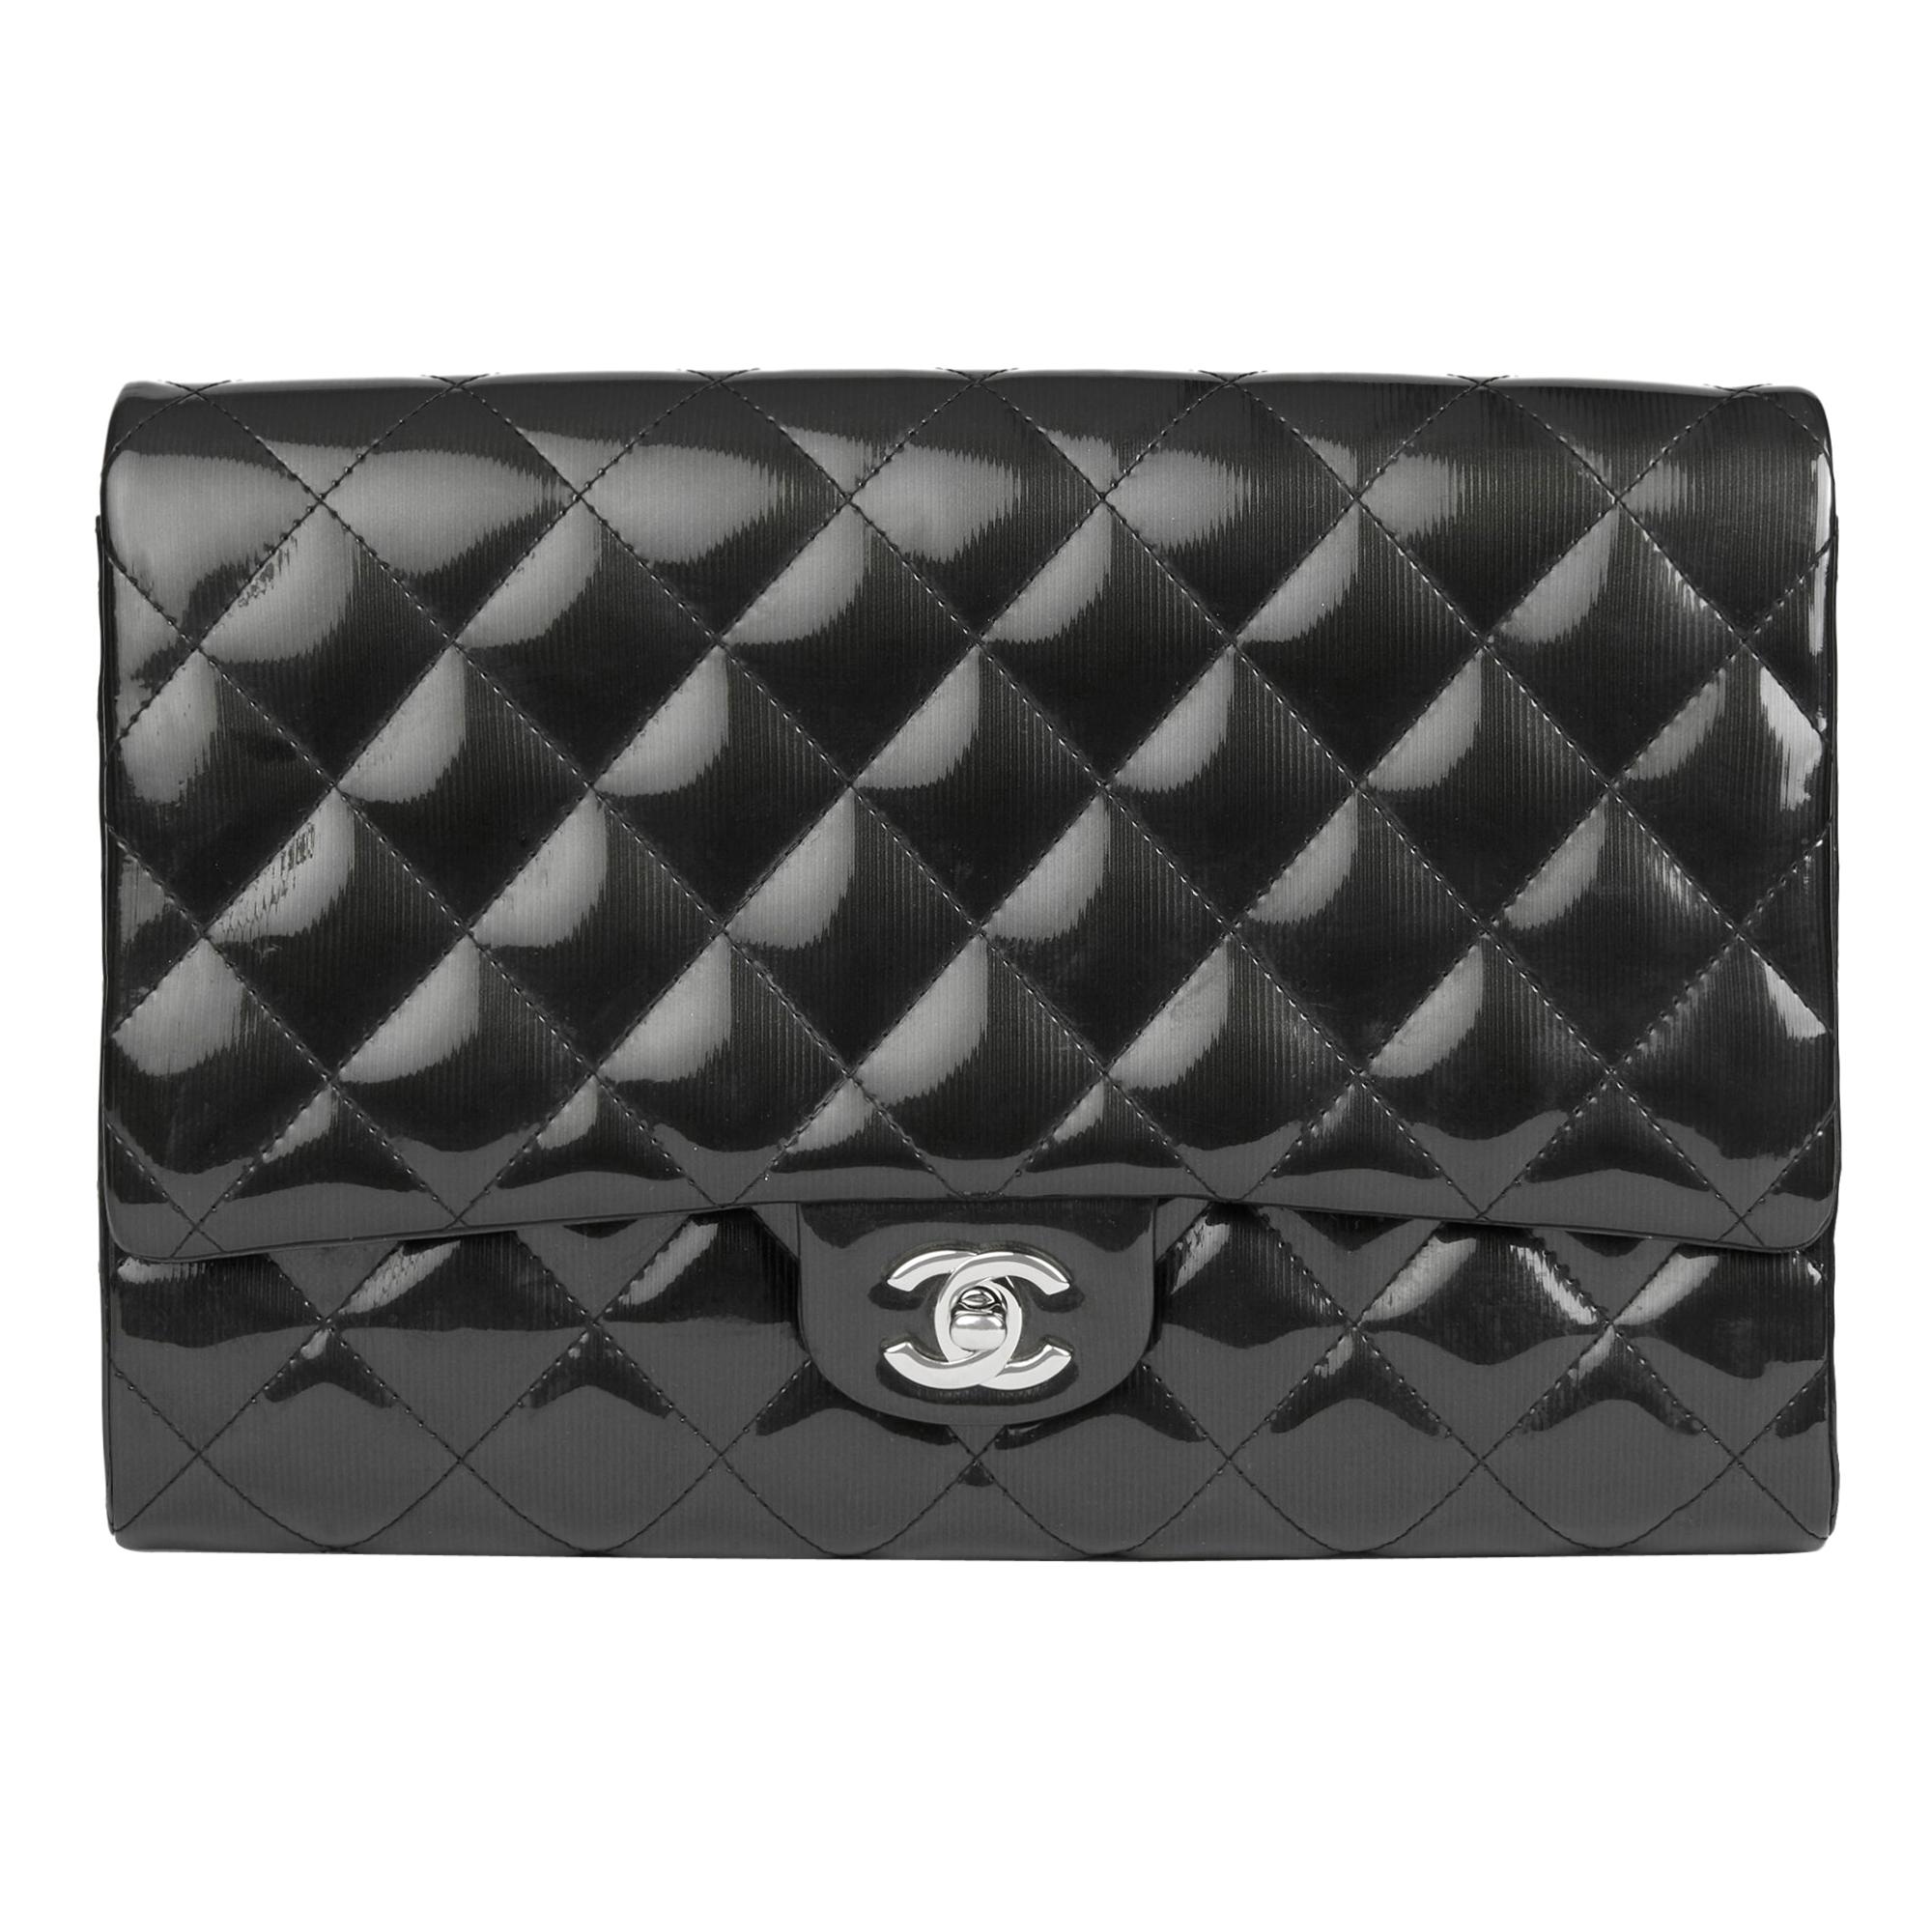 2012 Chanel Black Quilted Patent Leather Clutch-on-Chain